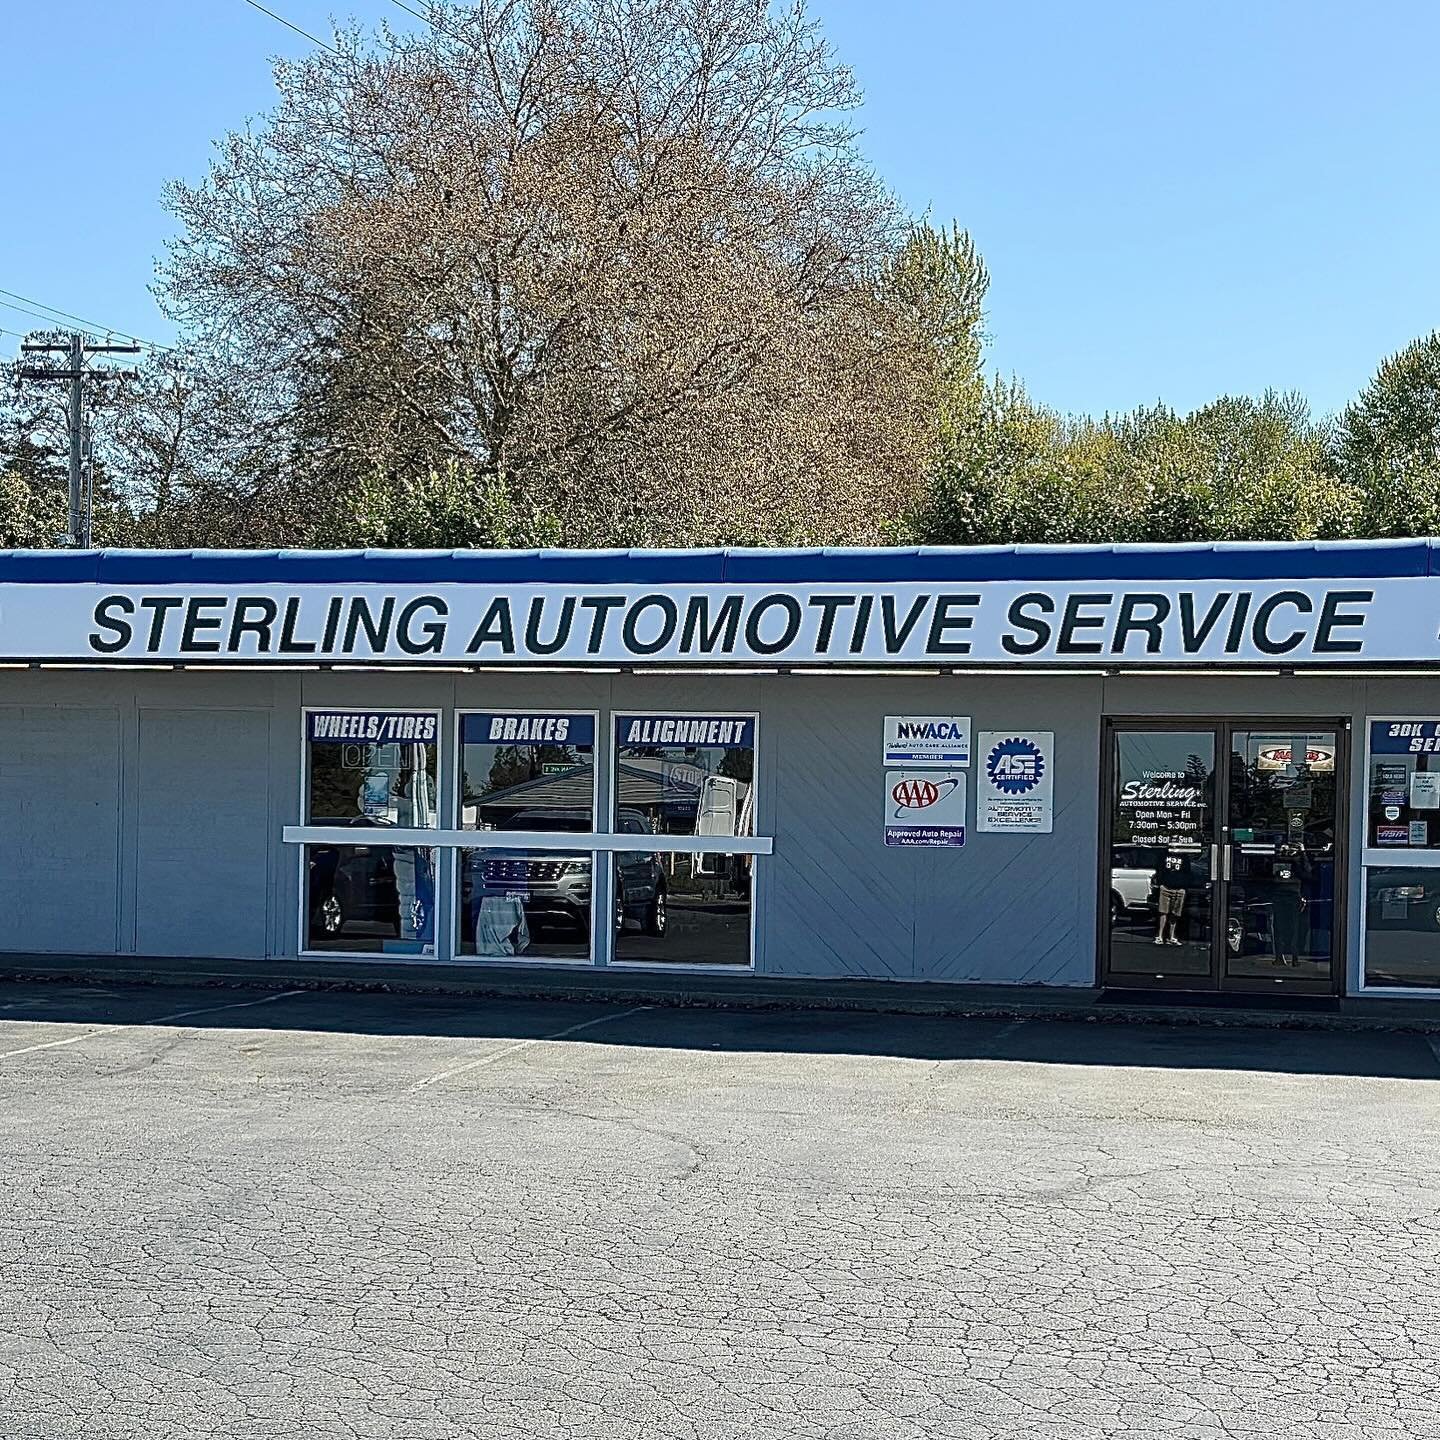 Removal of old vinyl and replaced with the new new! 👏🏻 Freshened up for Sterling Automotive in Edgewood!